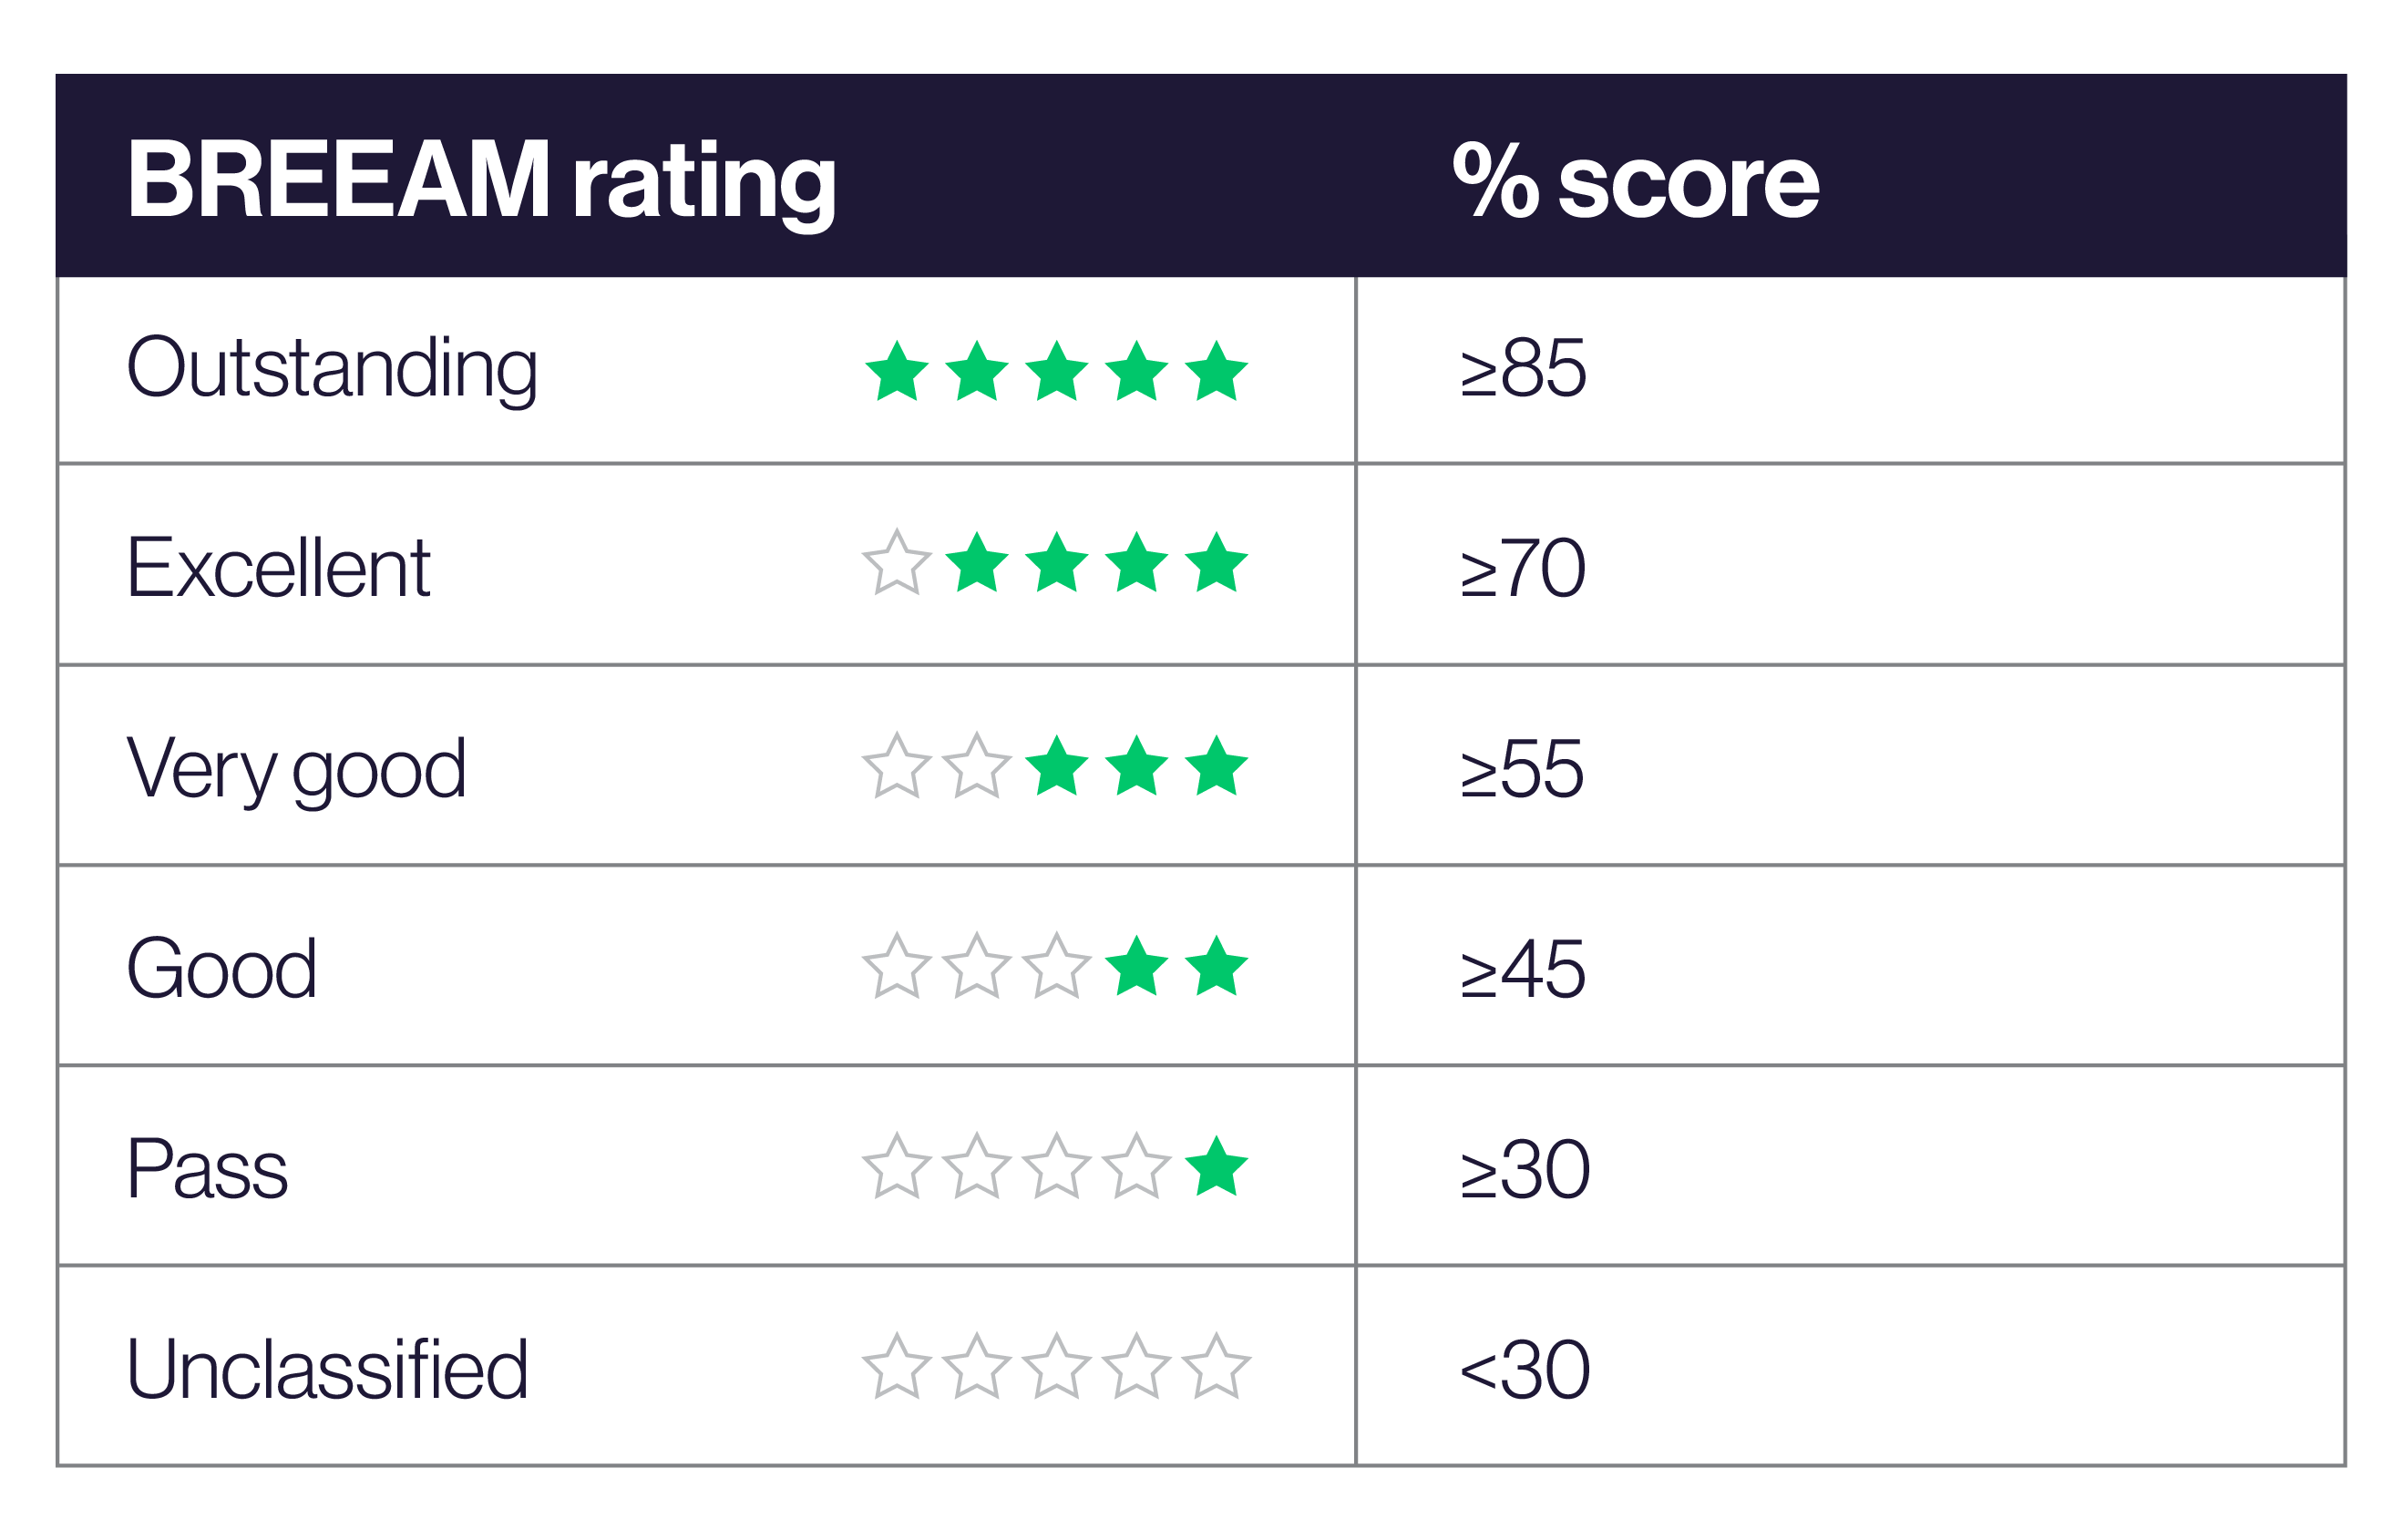 BREEAM ratings table showing assessment scores